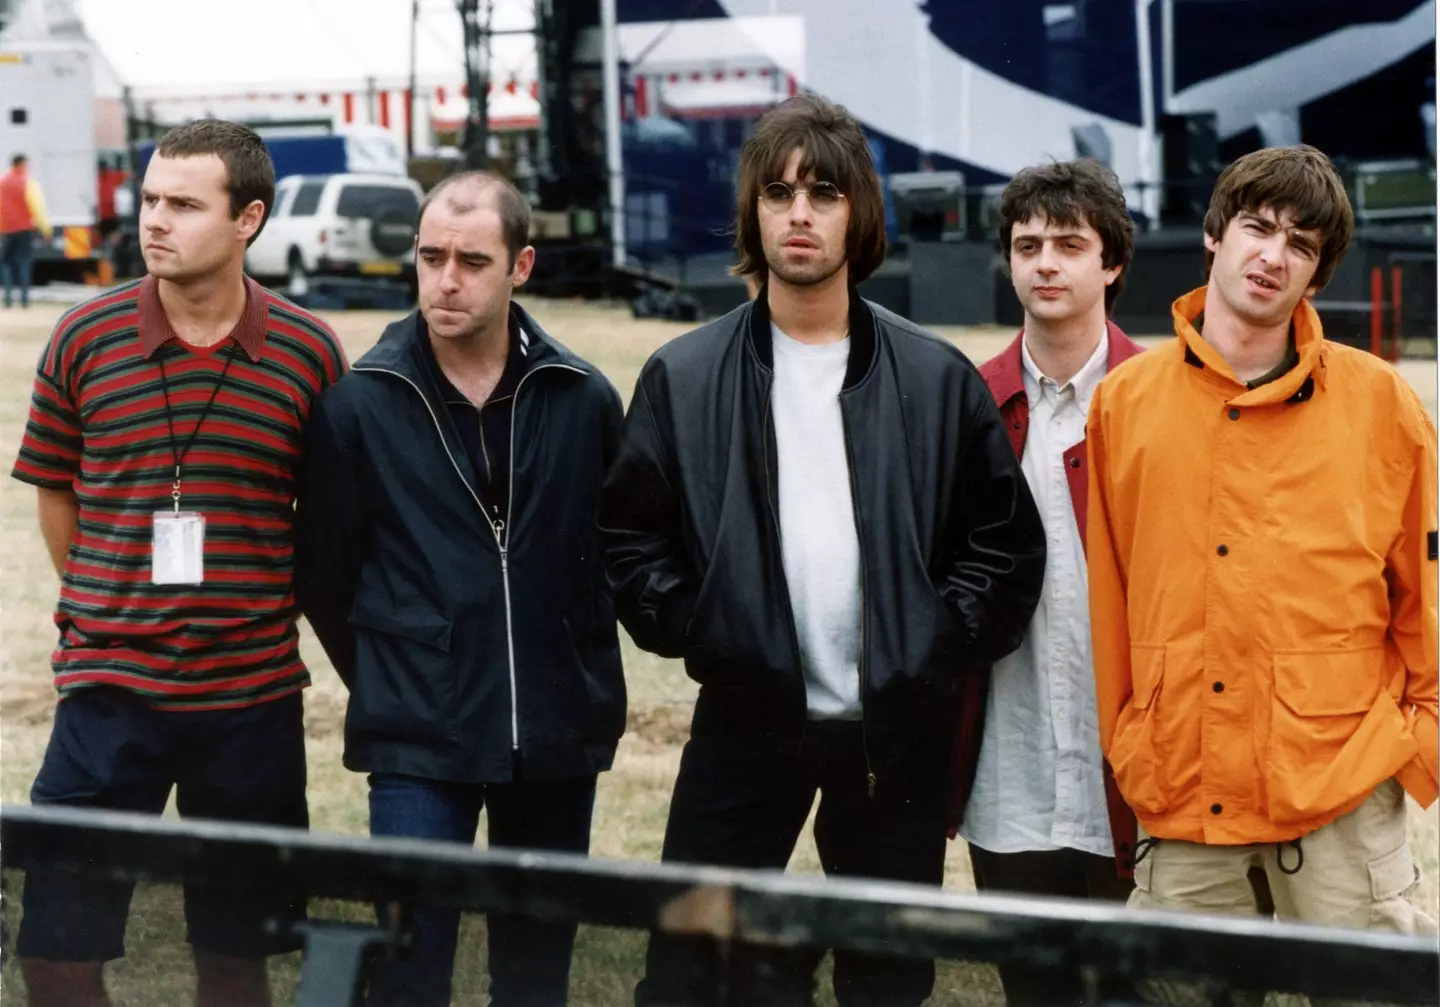 You'd imagine Oasis could sell out every venue on the planet.